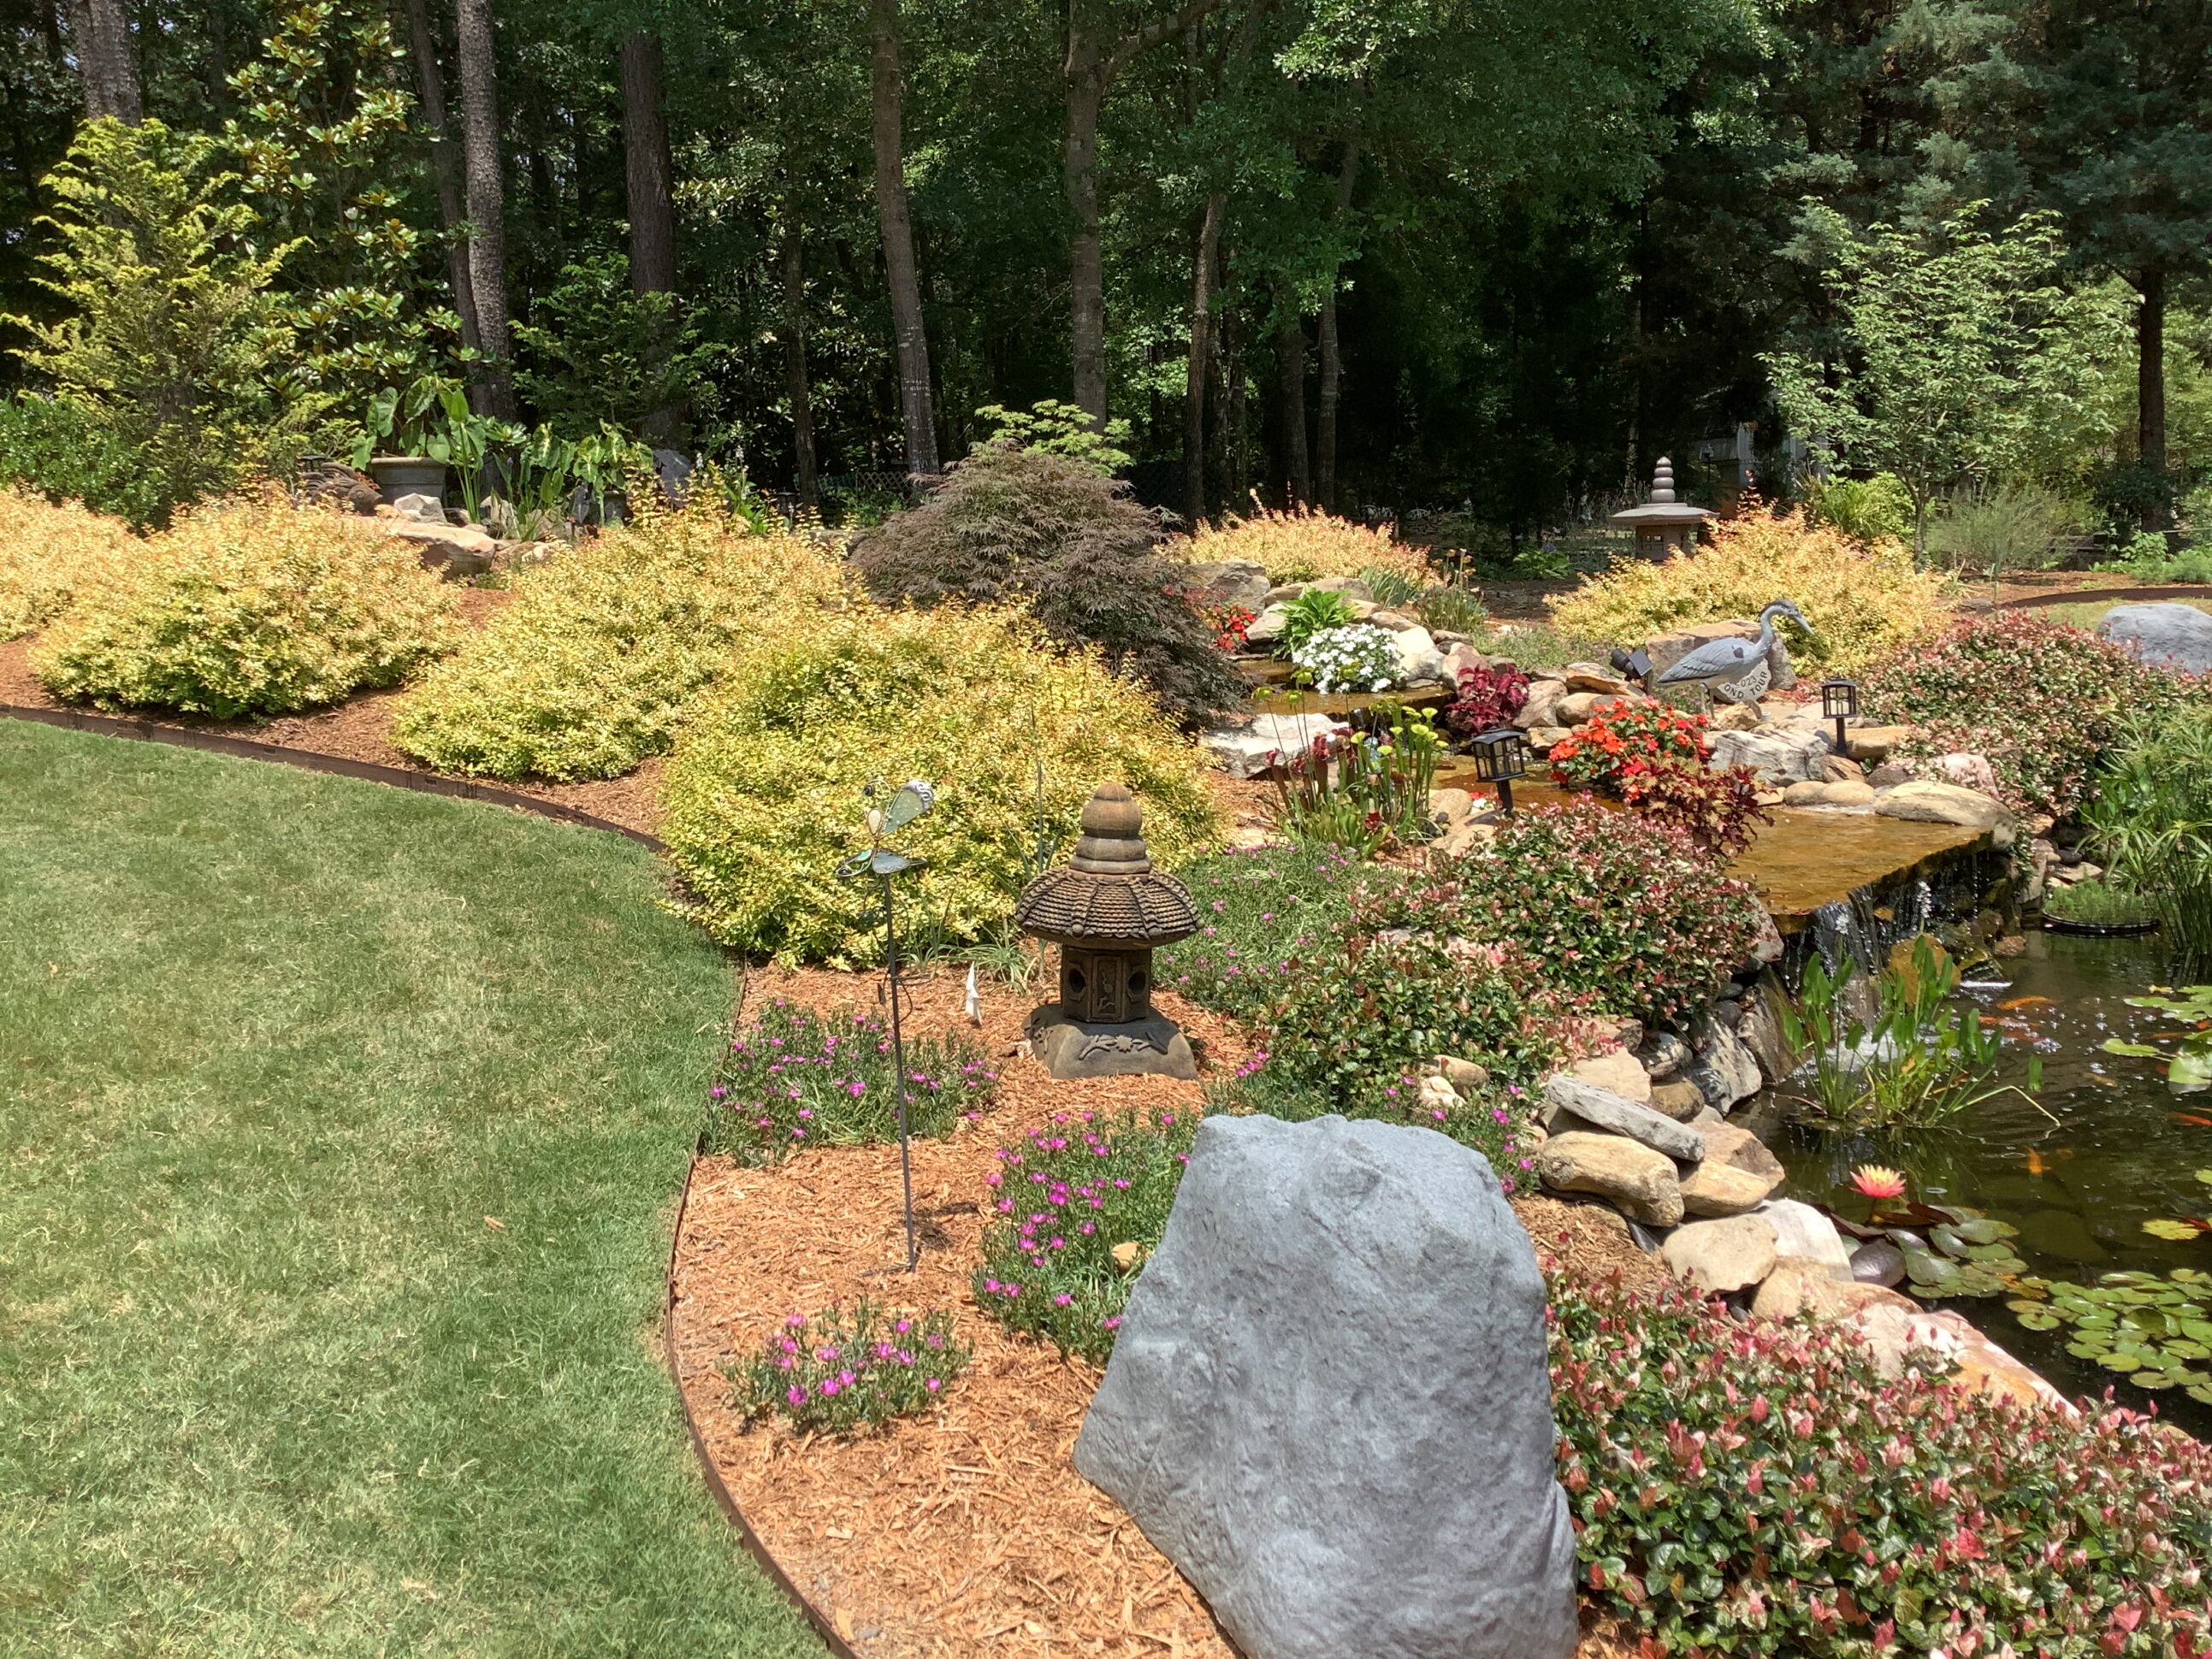 A garden with rocks and trees in the background.